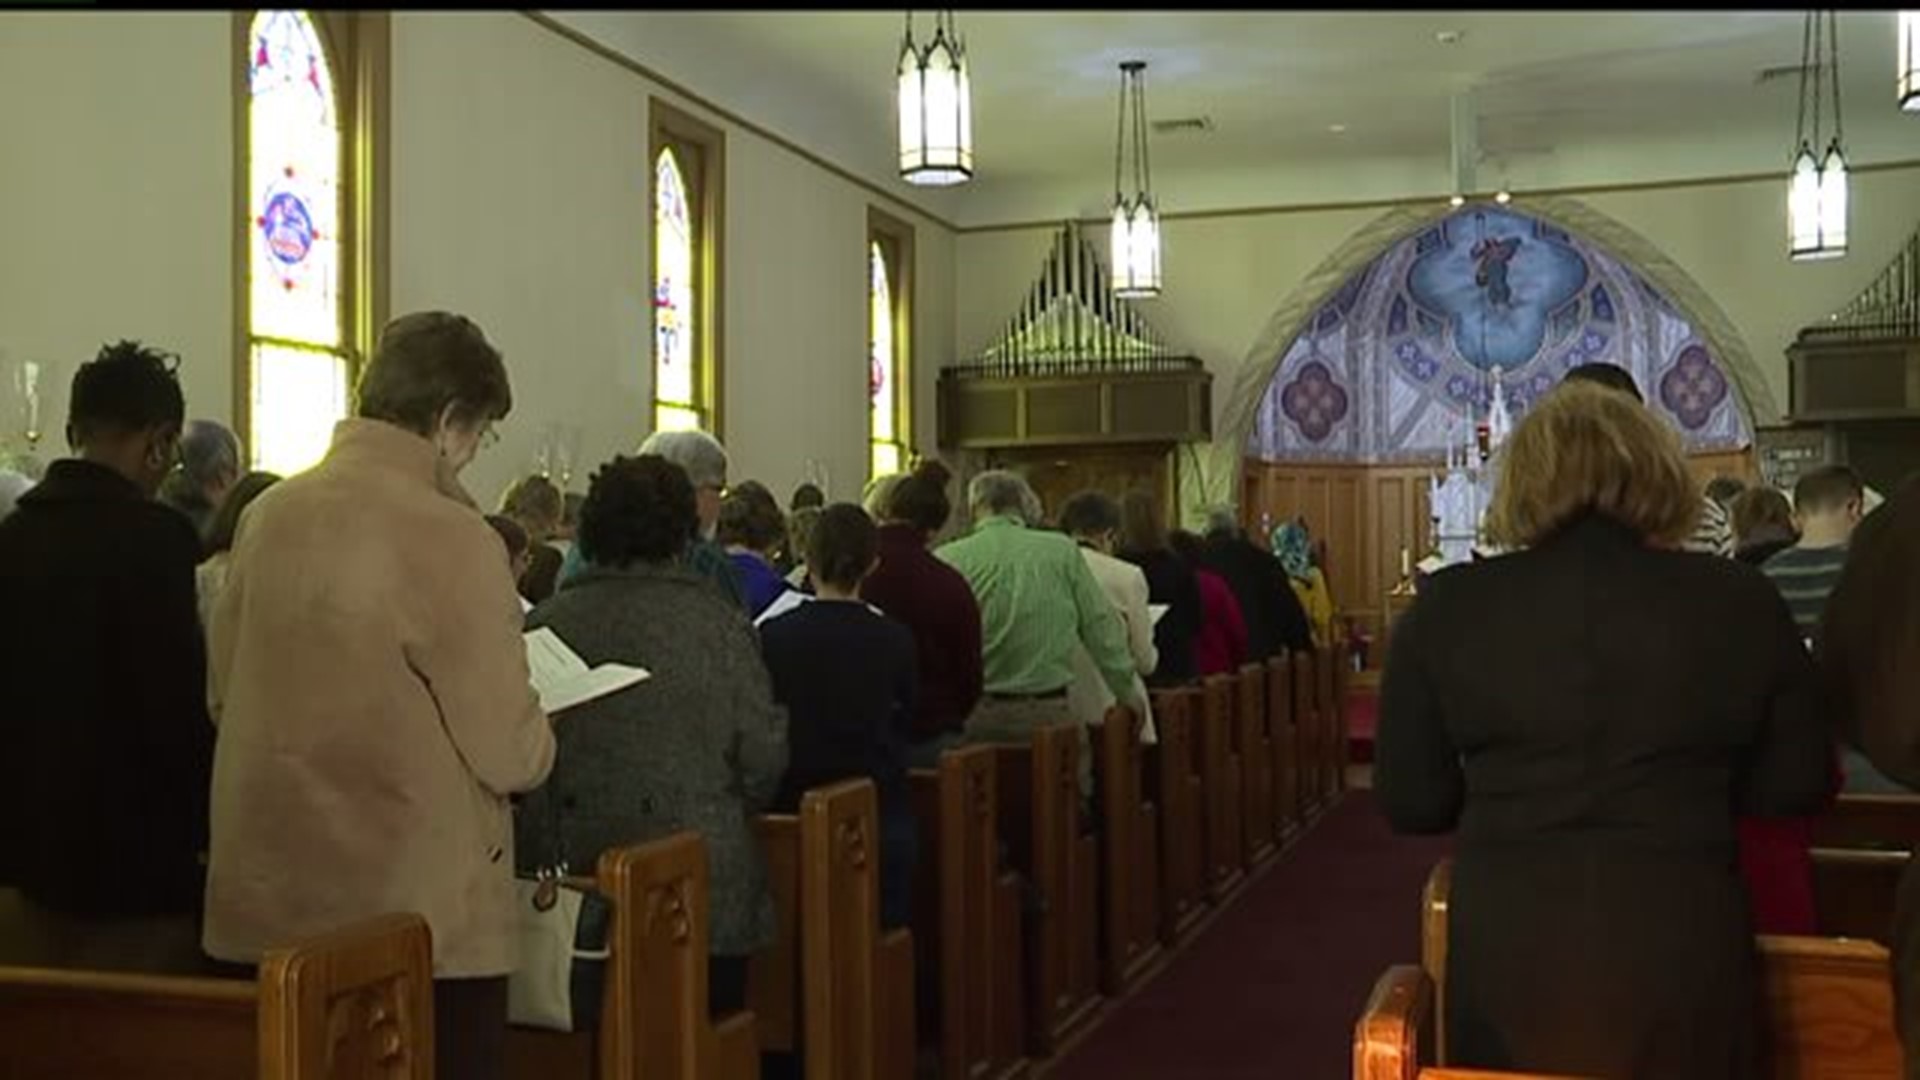 Interfaith service held to bring unity after recent religion-inspired threats